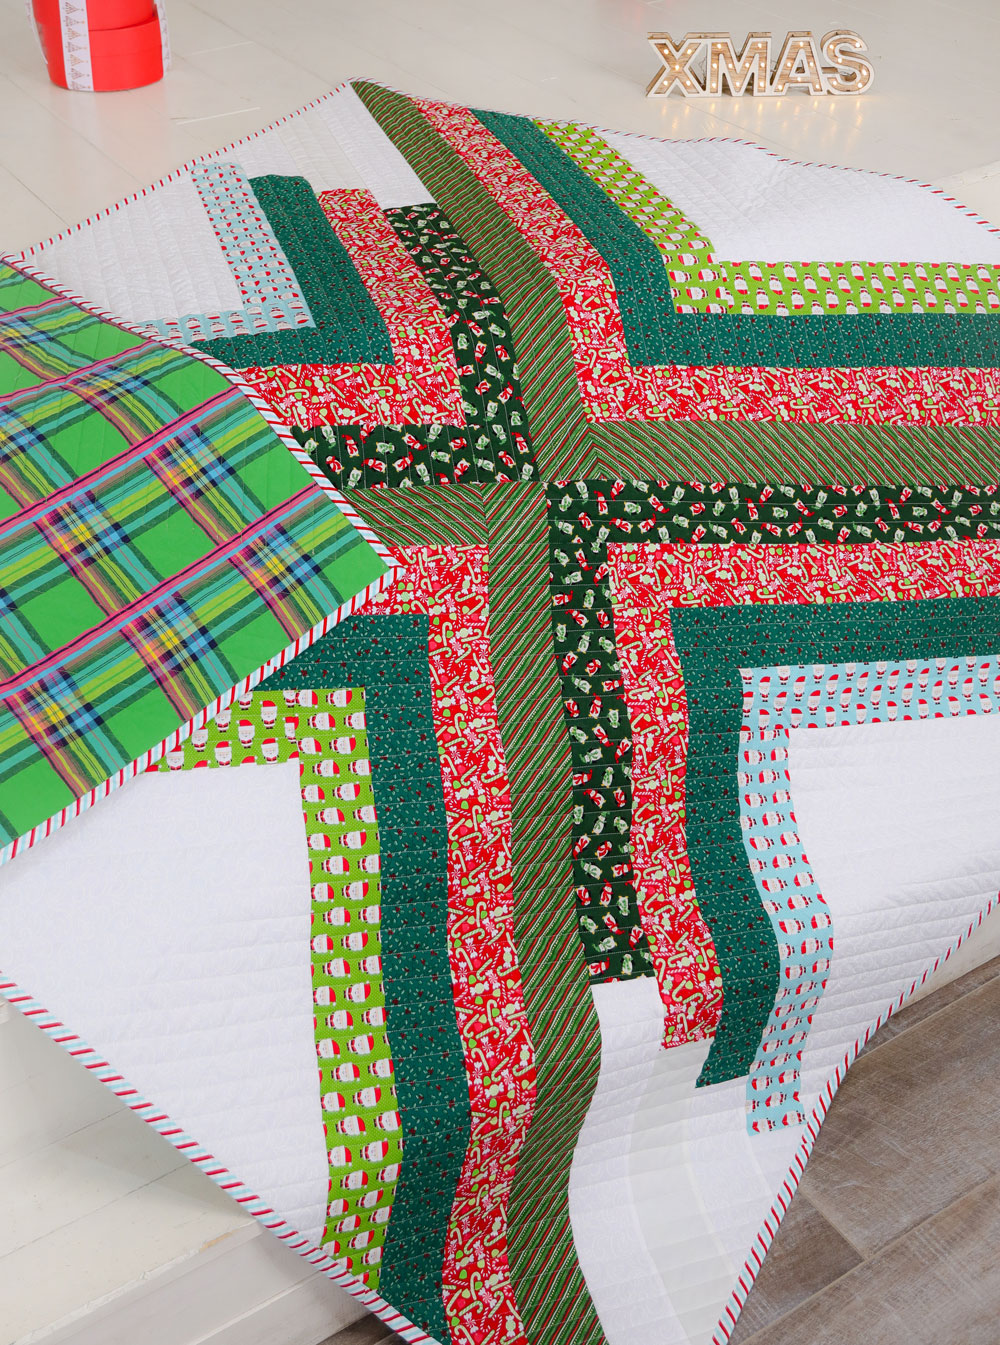 The Sugar POP quilt pattern is a PDF download that includes throw, baby and a pillow size. This modern design works well as a gradient or with fabric scraps. This pattern makes the perfect Christmas holiday quilt too!